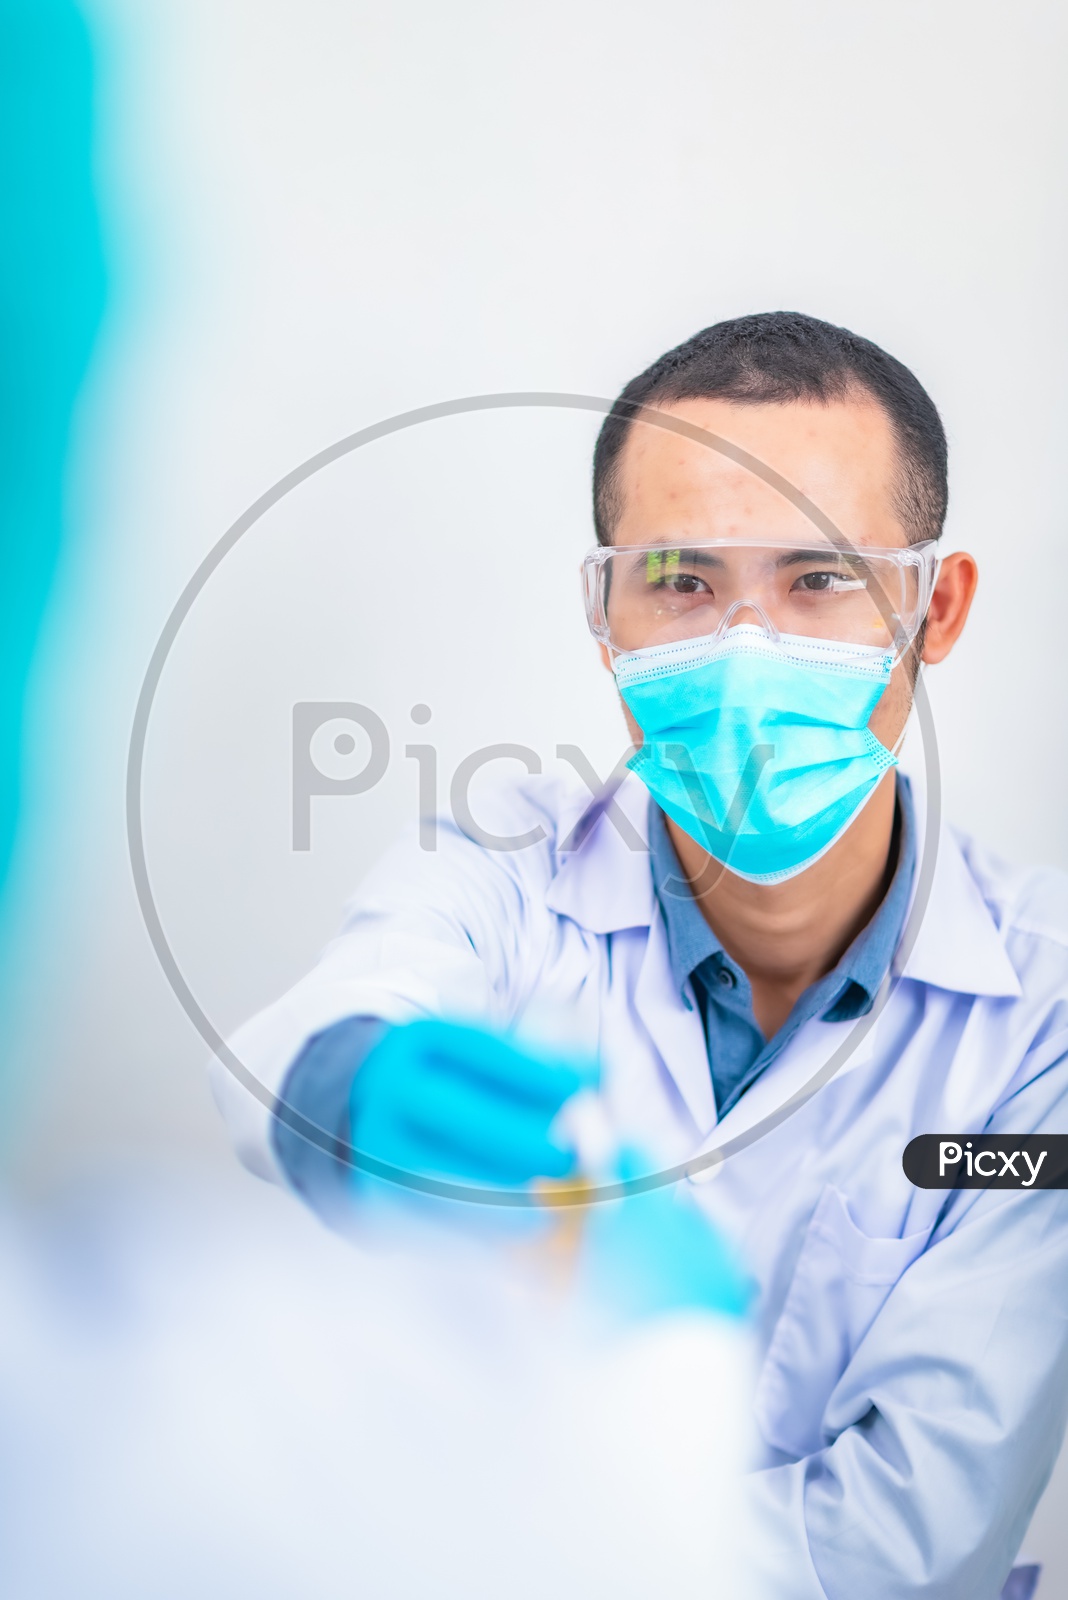 Research Scientist Performing Experiments In Laboratory  Wearing an Apron and Mask